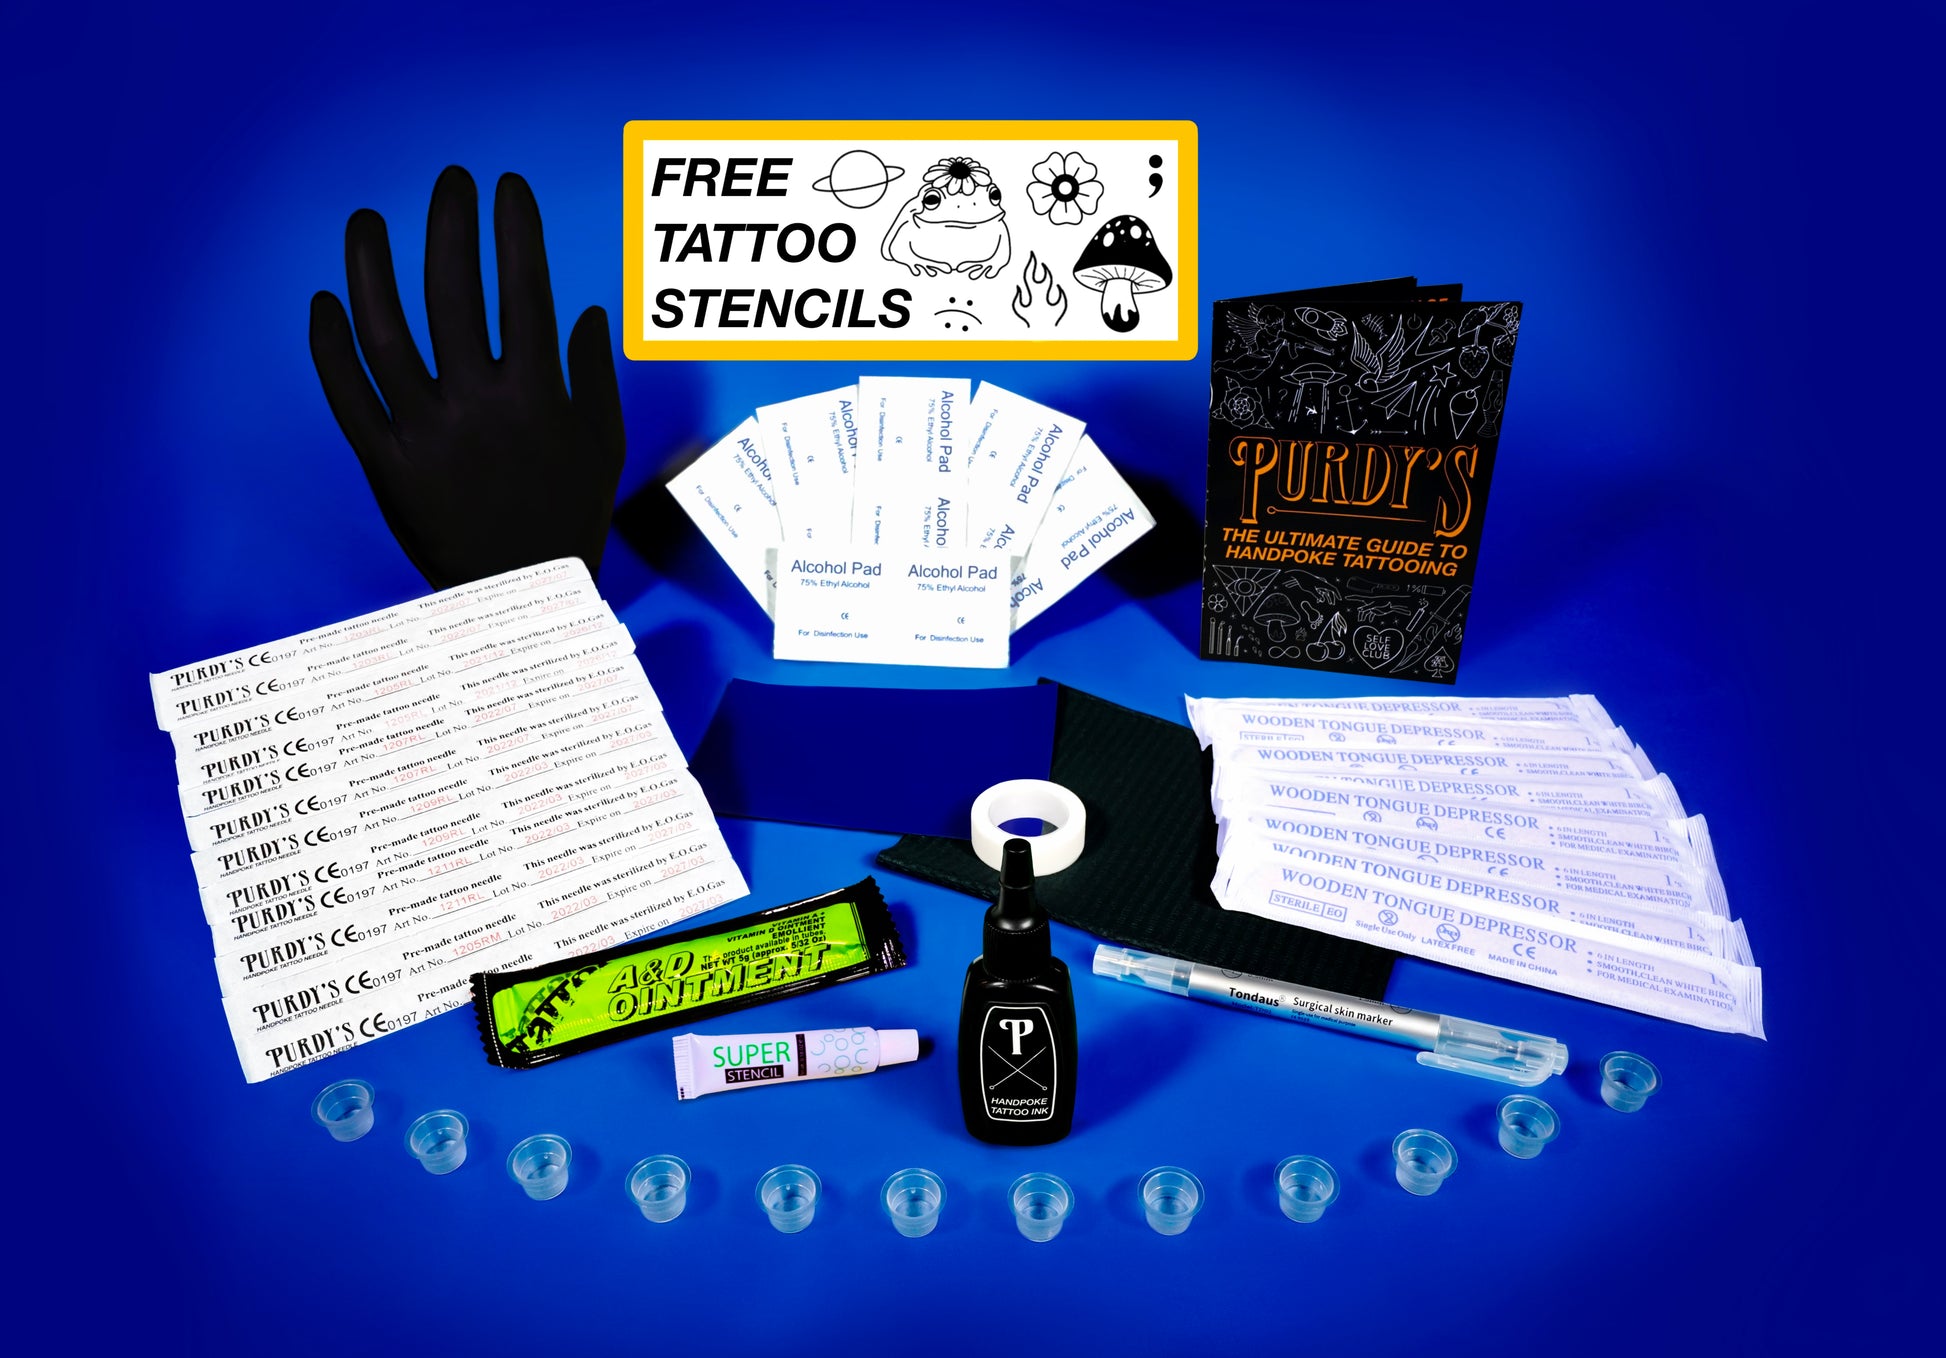 Black Traditional Tattoo Hand Needle Kit with Ink Needles